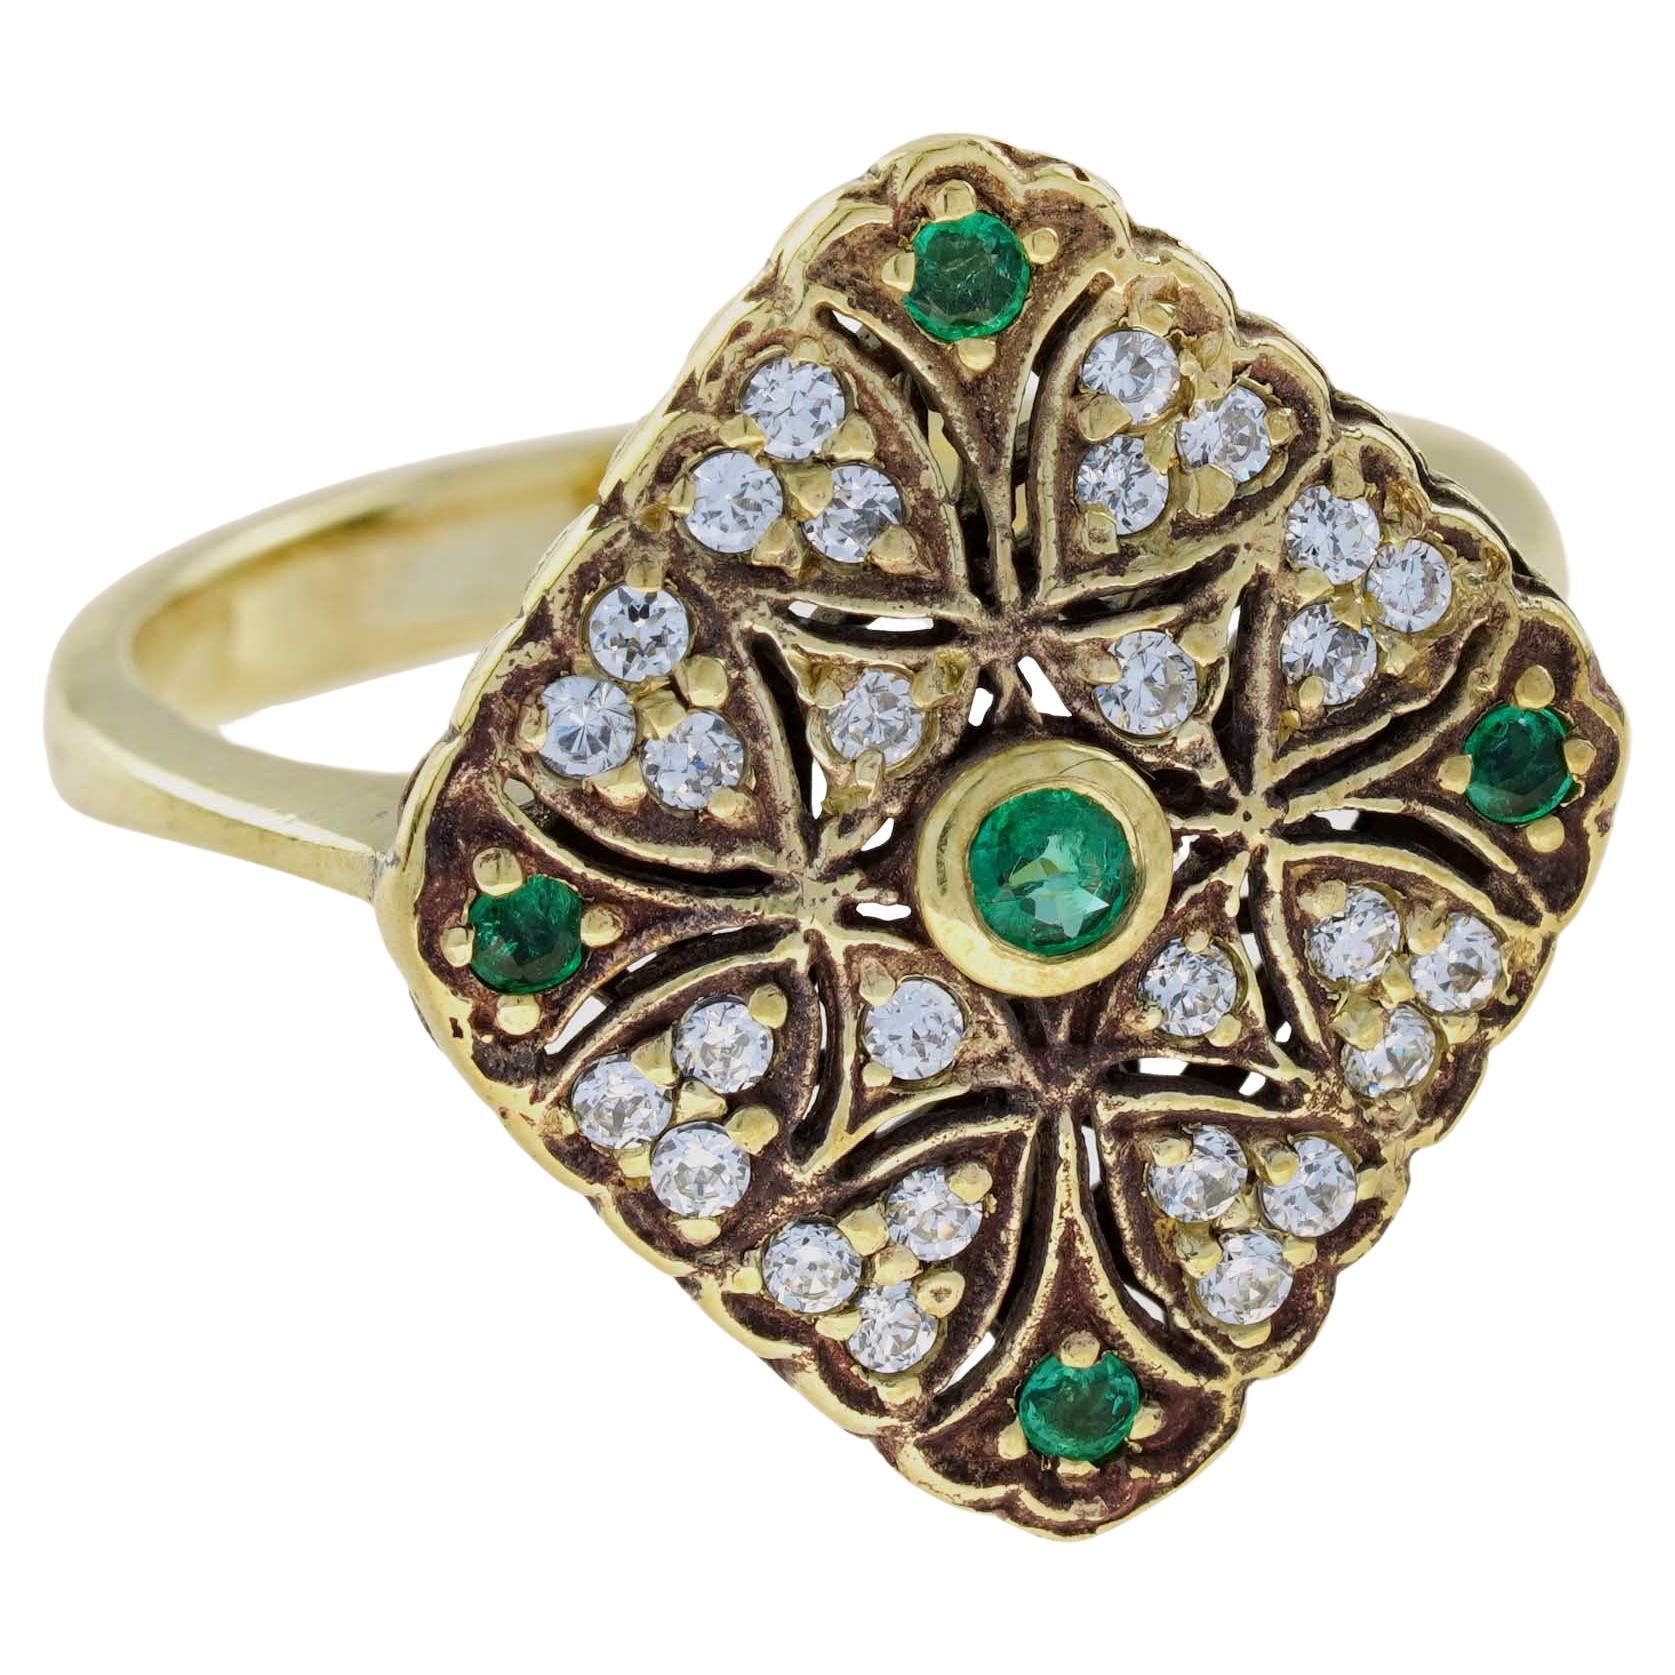 For Sale:  Natural Emerald and Diamond Rhombus Filigree Ring in Solid 9K Yellow Gold